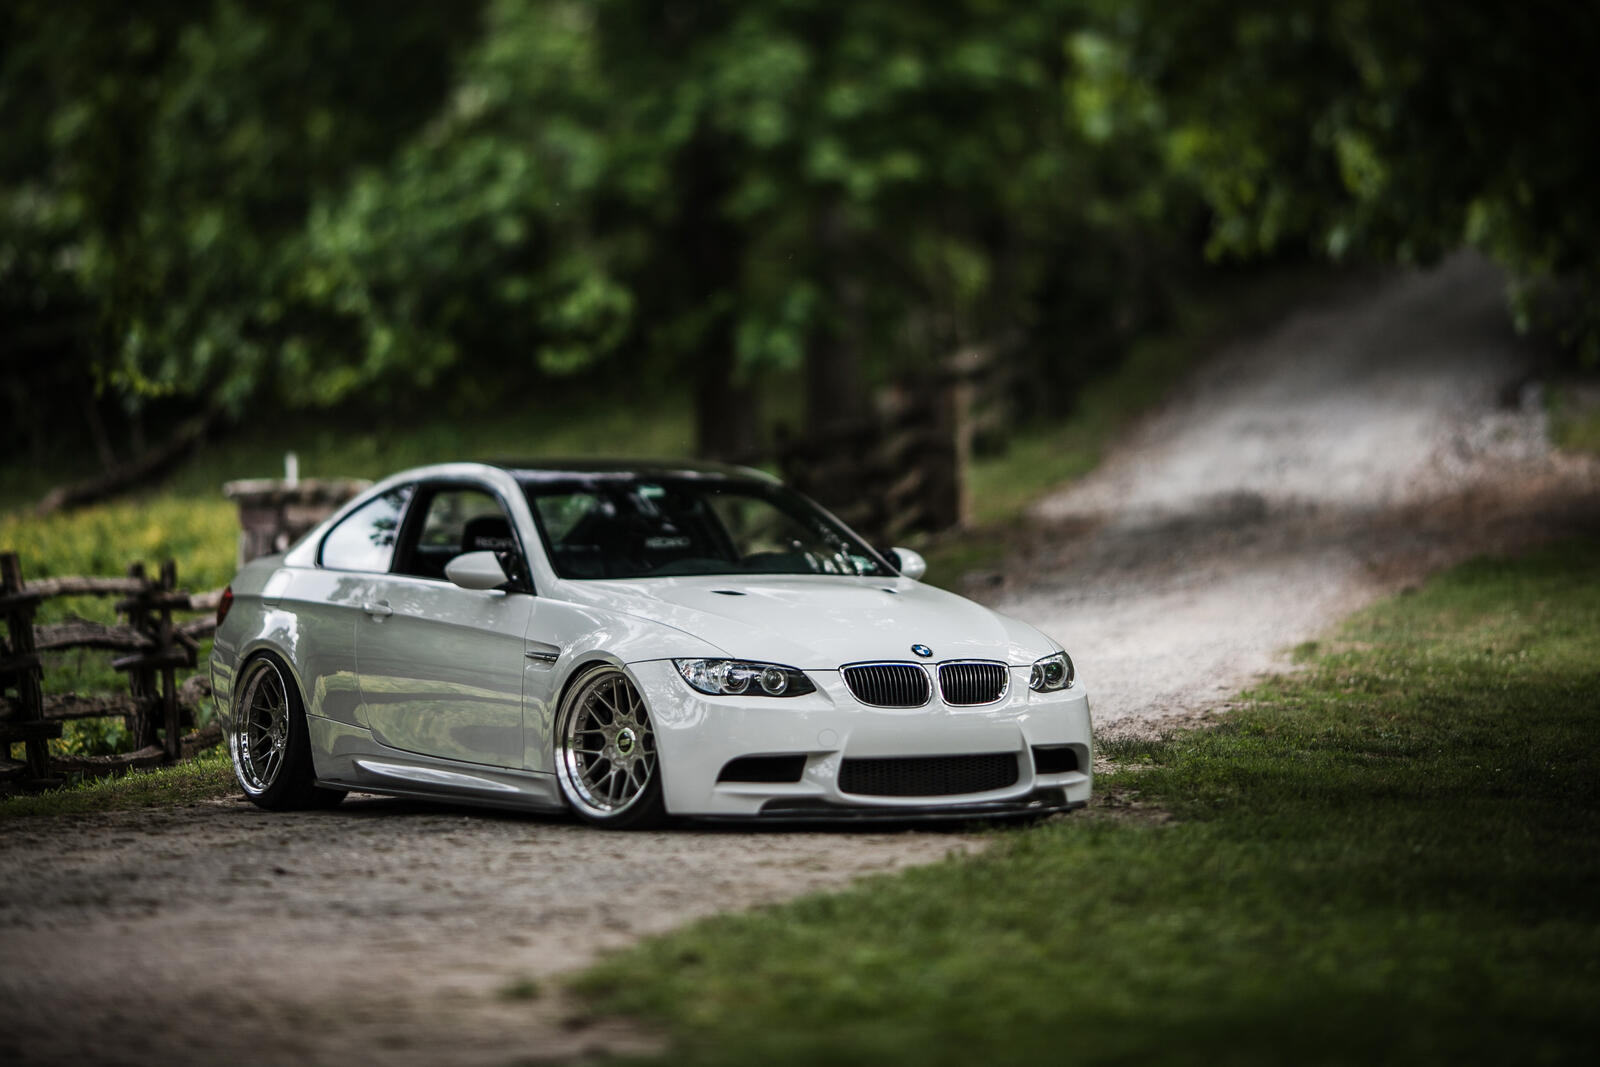 Free photo White bmw m3 e92 coupe on a dirt road